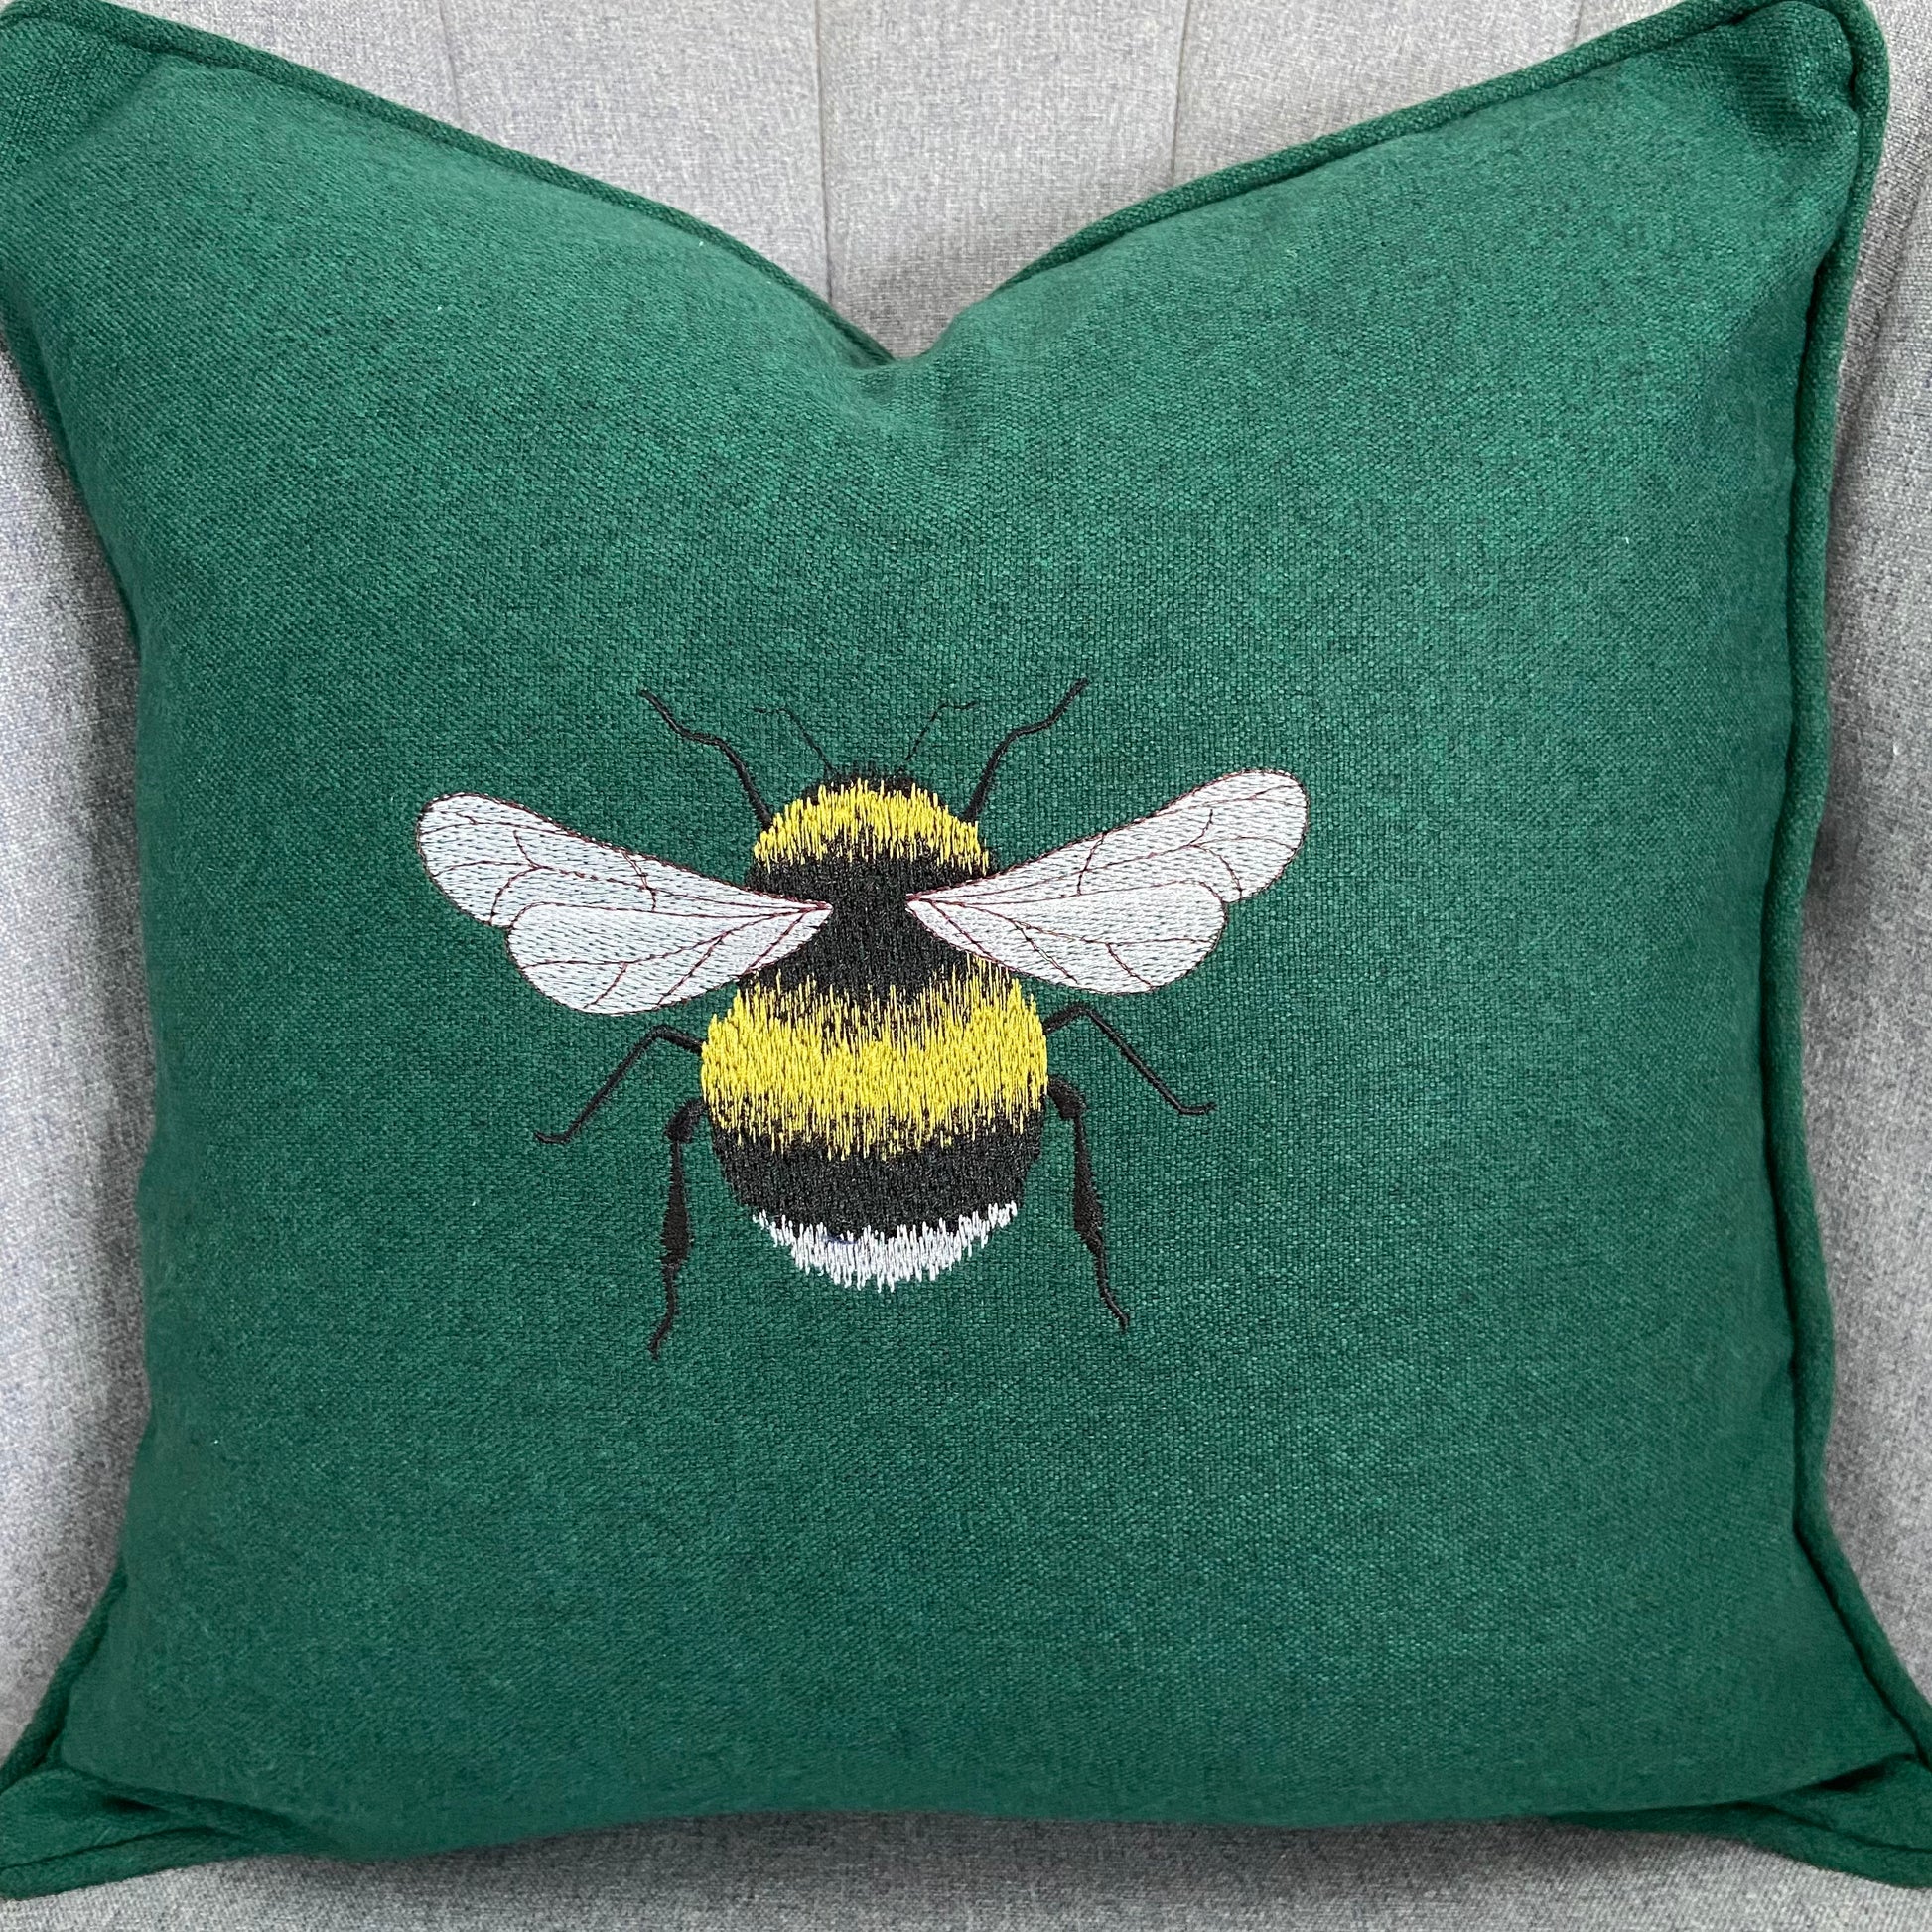 Bee Embroidered Cushion Cover